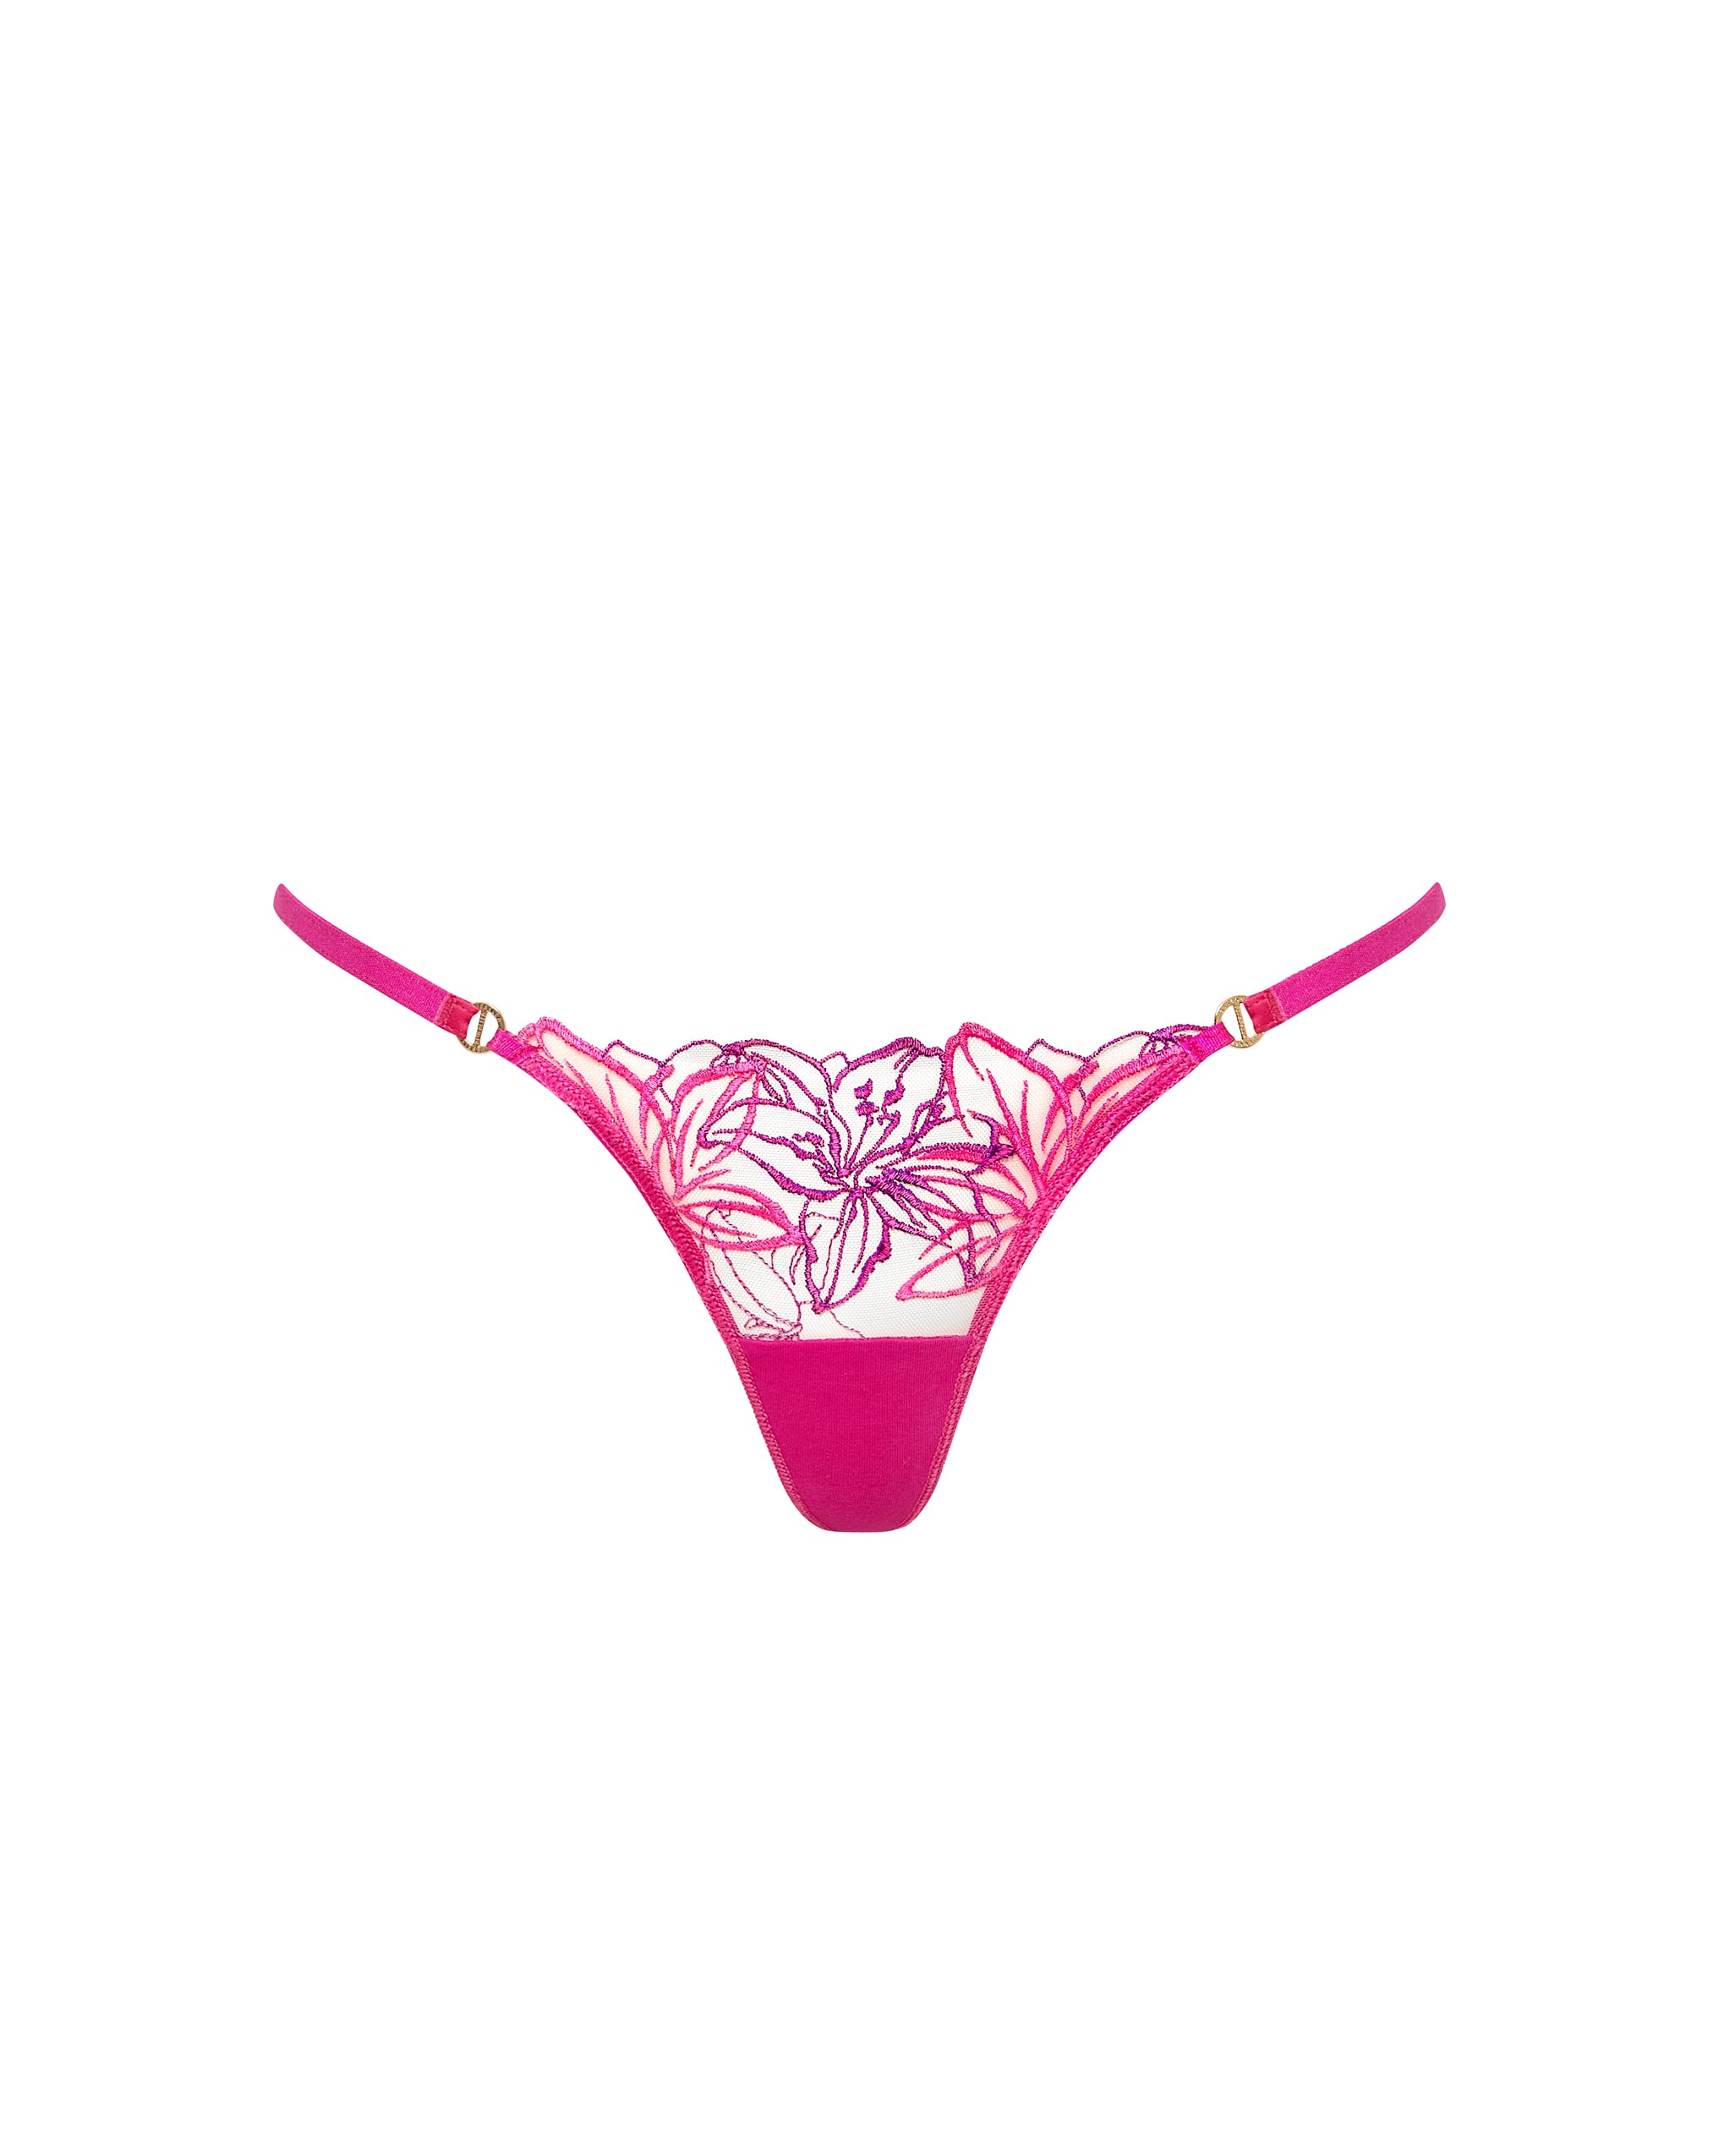 bluebella lilly thong fuchsia pink/bright violet/sheer